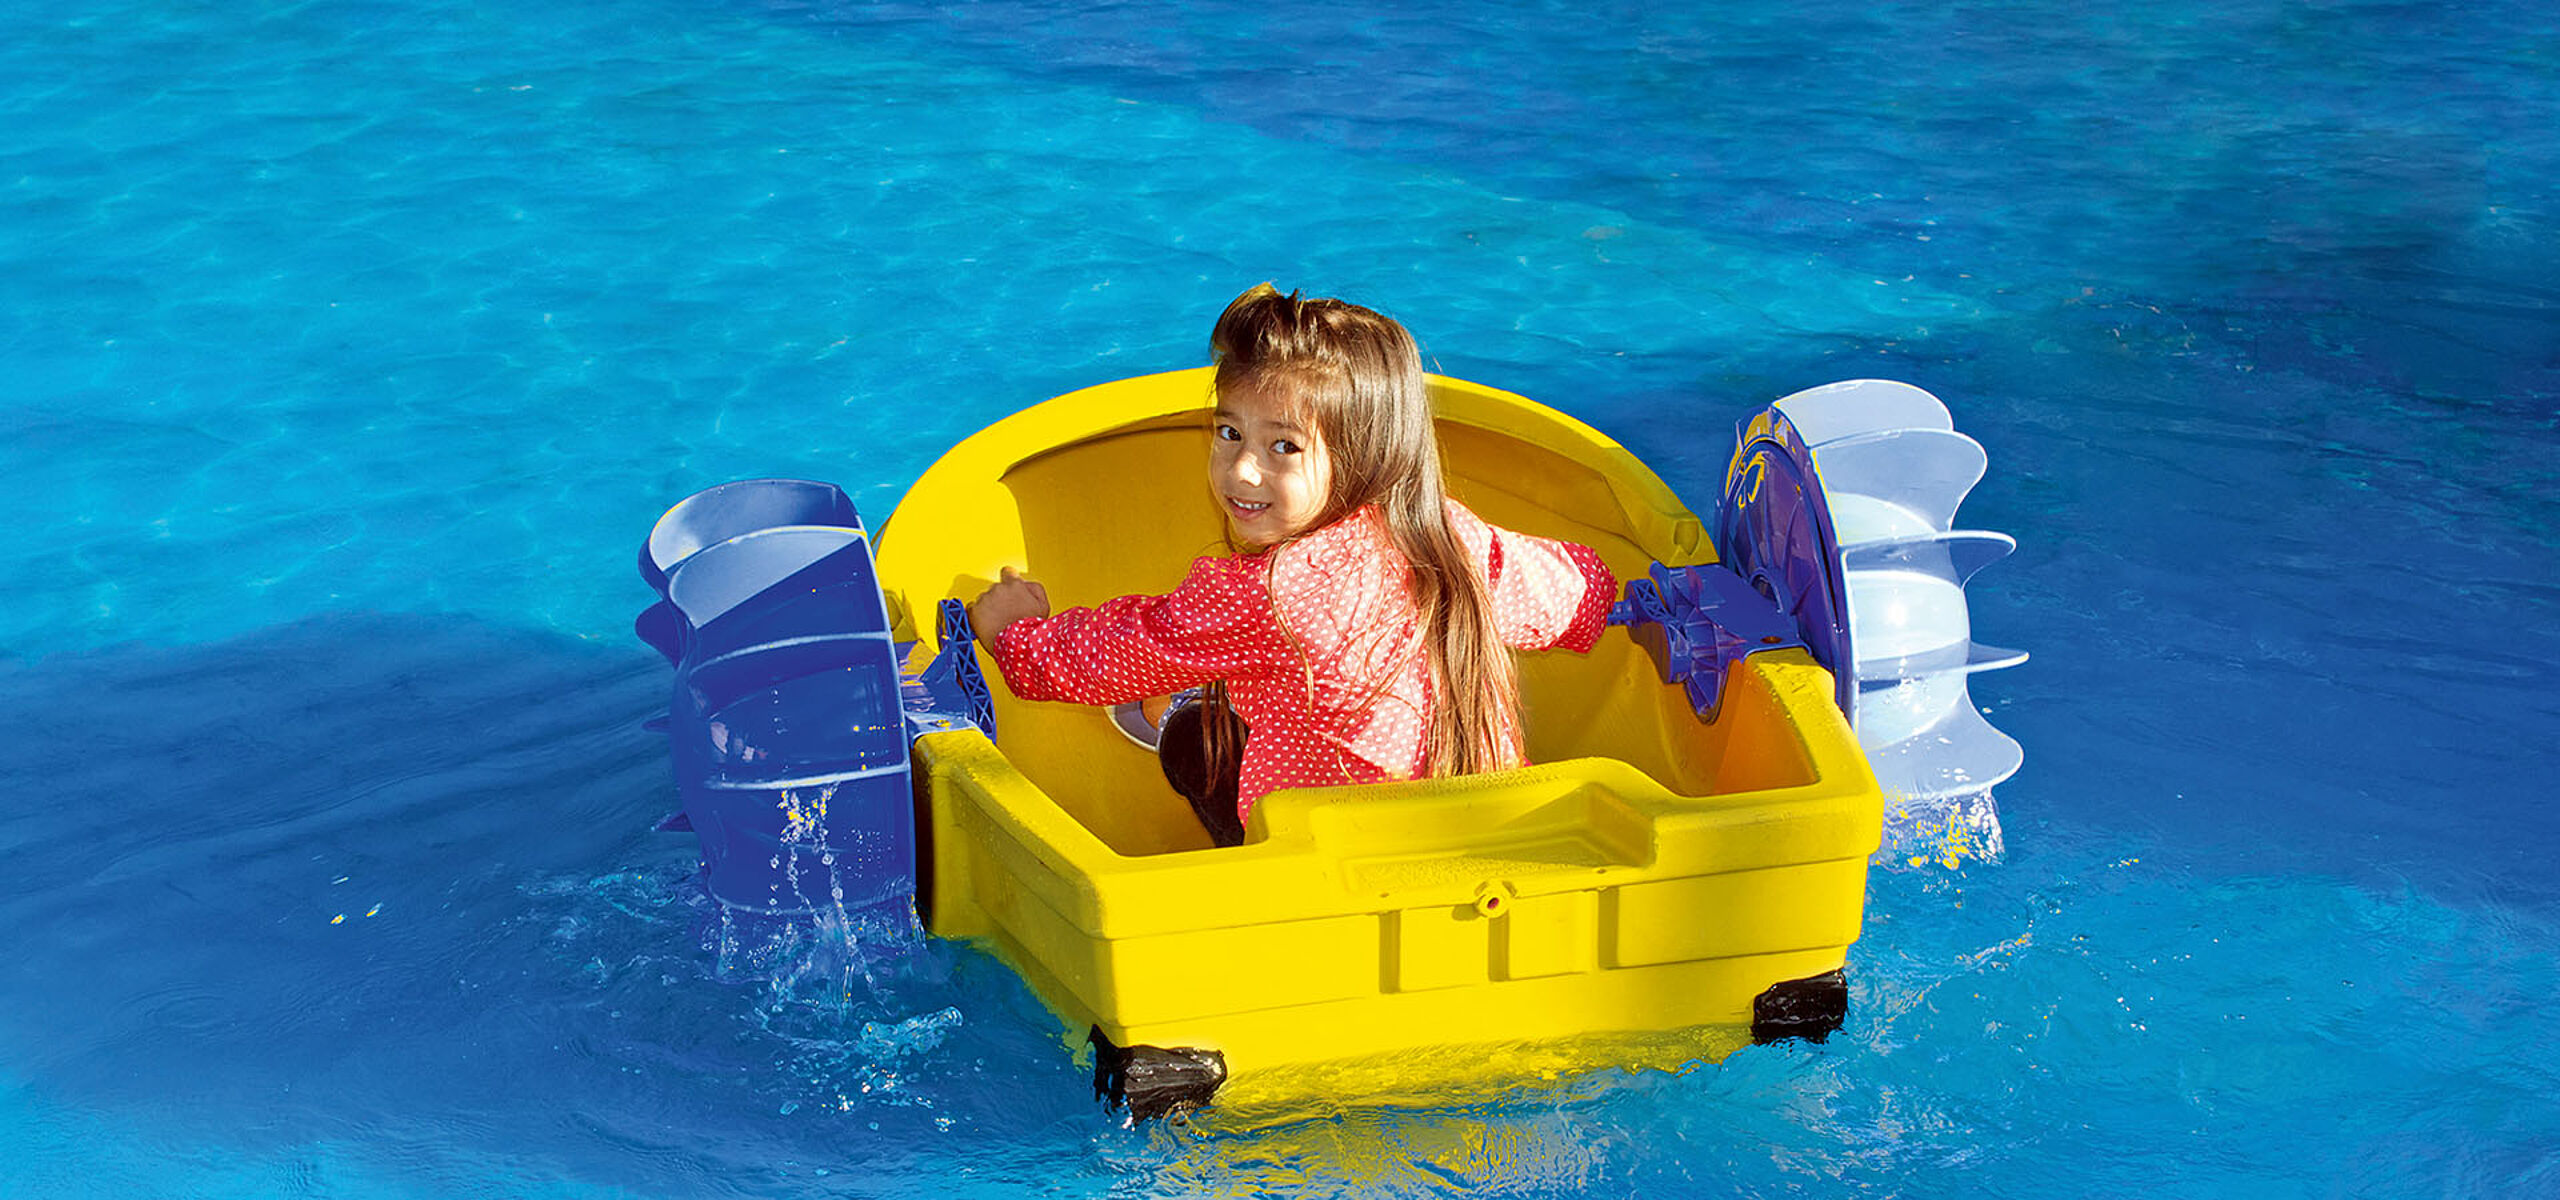 Paddle boat im Waterpark an der Ostsee